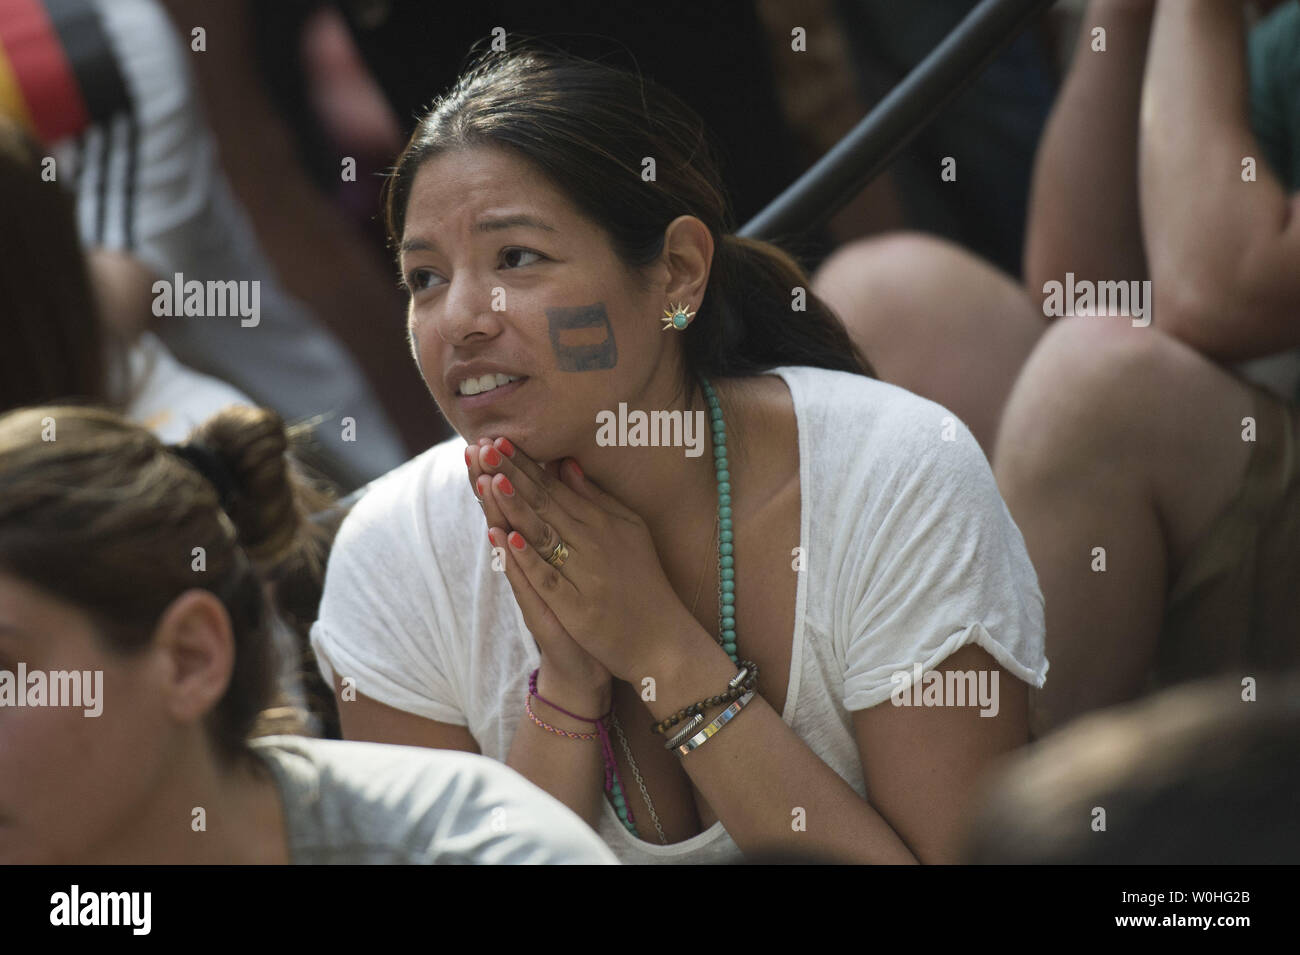 An Argentina fan watches as her team plays Germany in the 2014 World Cup final, during a watch party held at the Smithsonian Portrait Gallery, in Washington, D.C. on July 13, 2014.  UPI/Kevin Dietsch Stock Photo